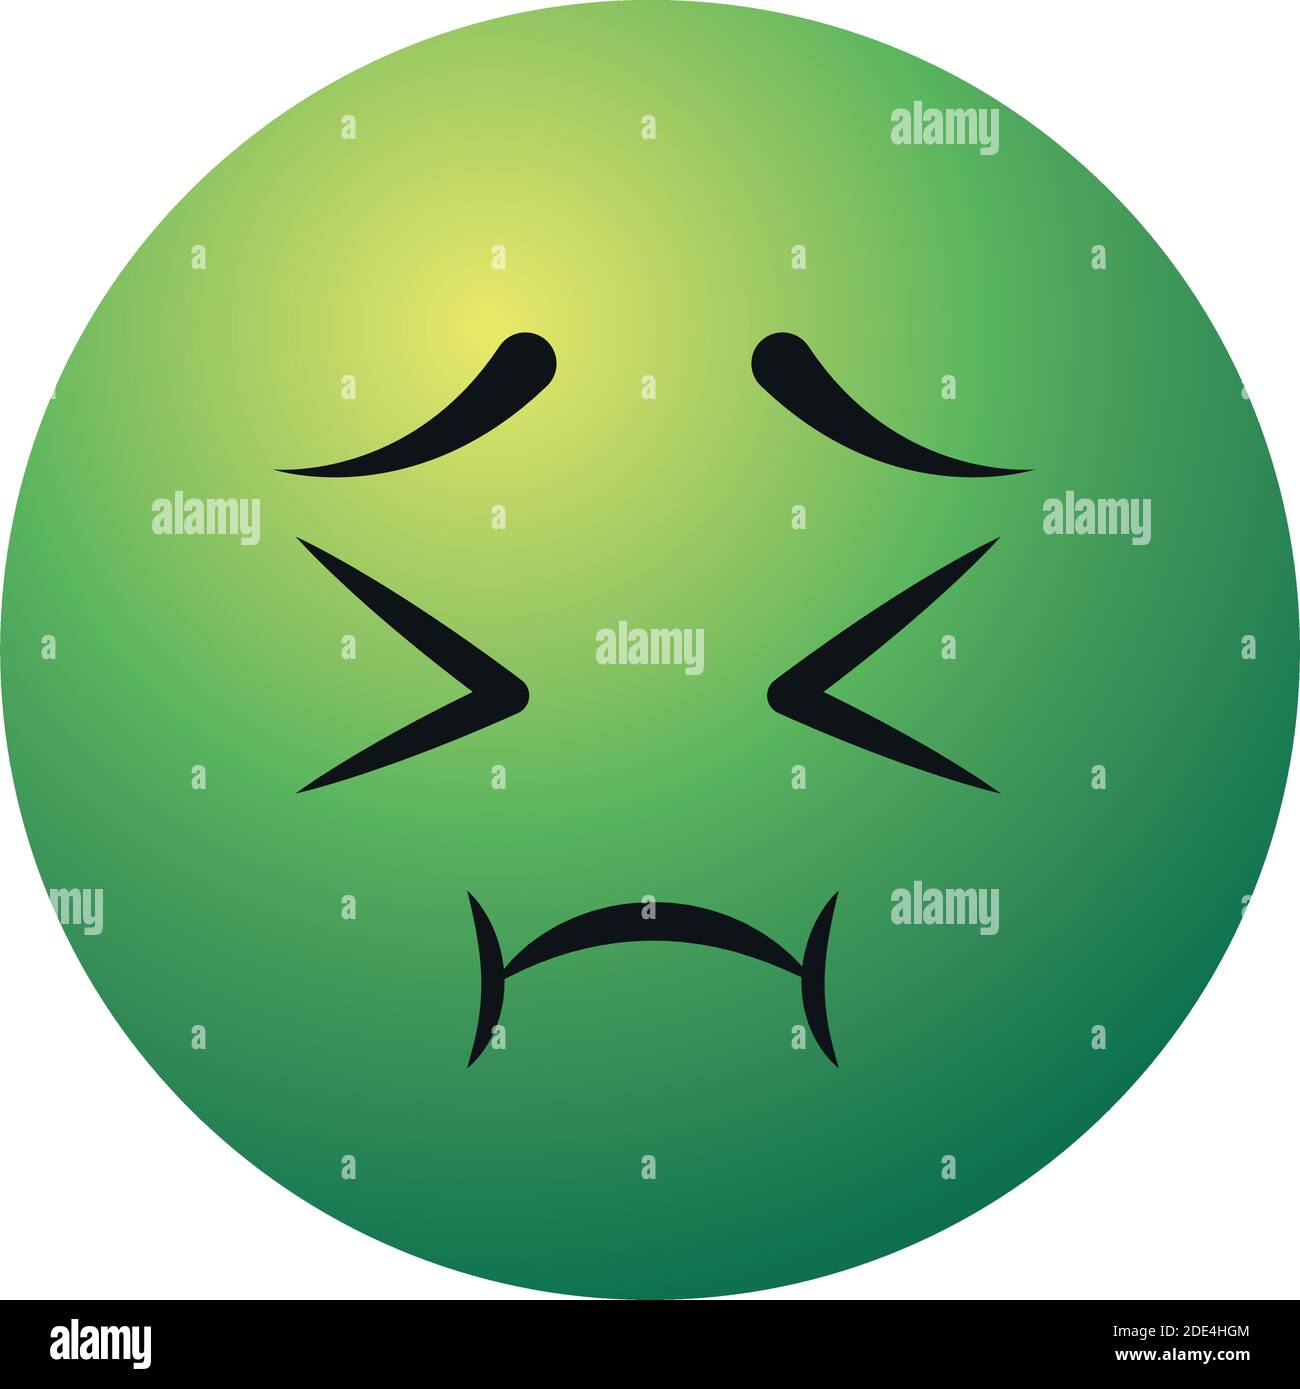 nauseated emoji face icon over white background, colorful design ...